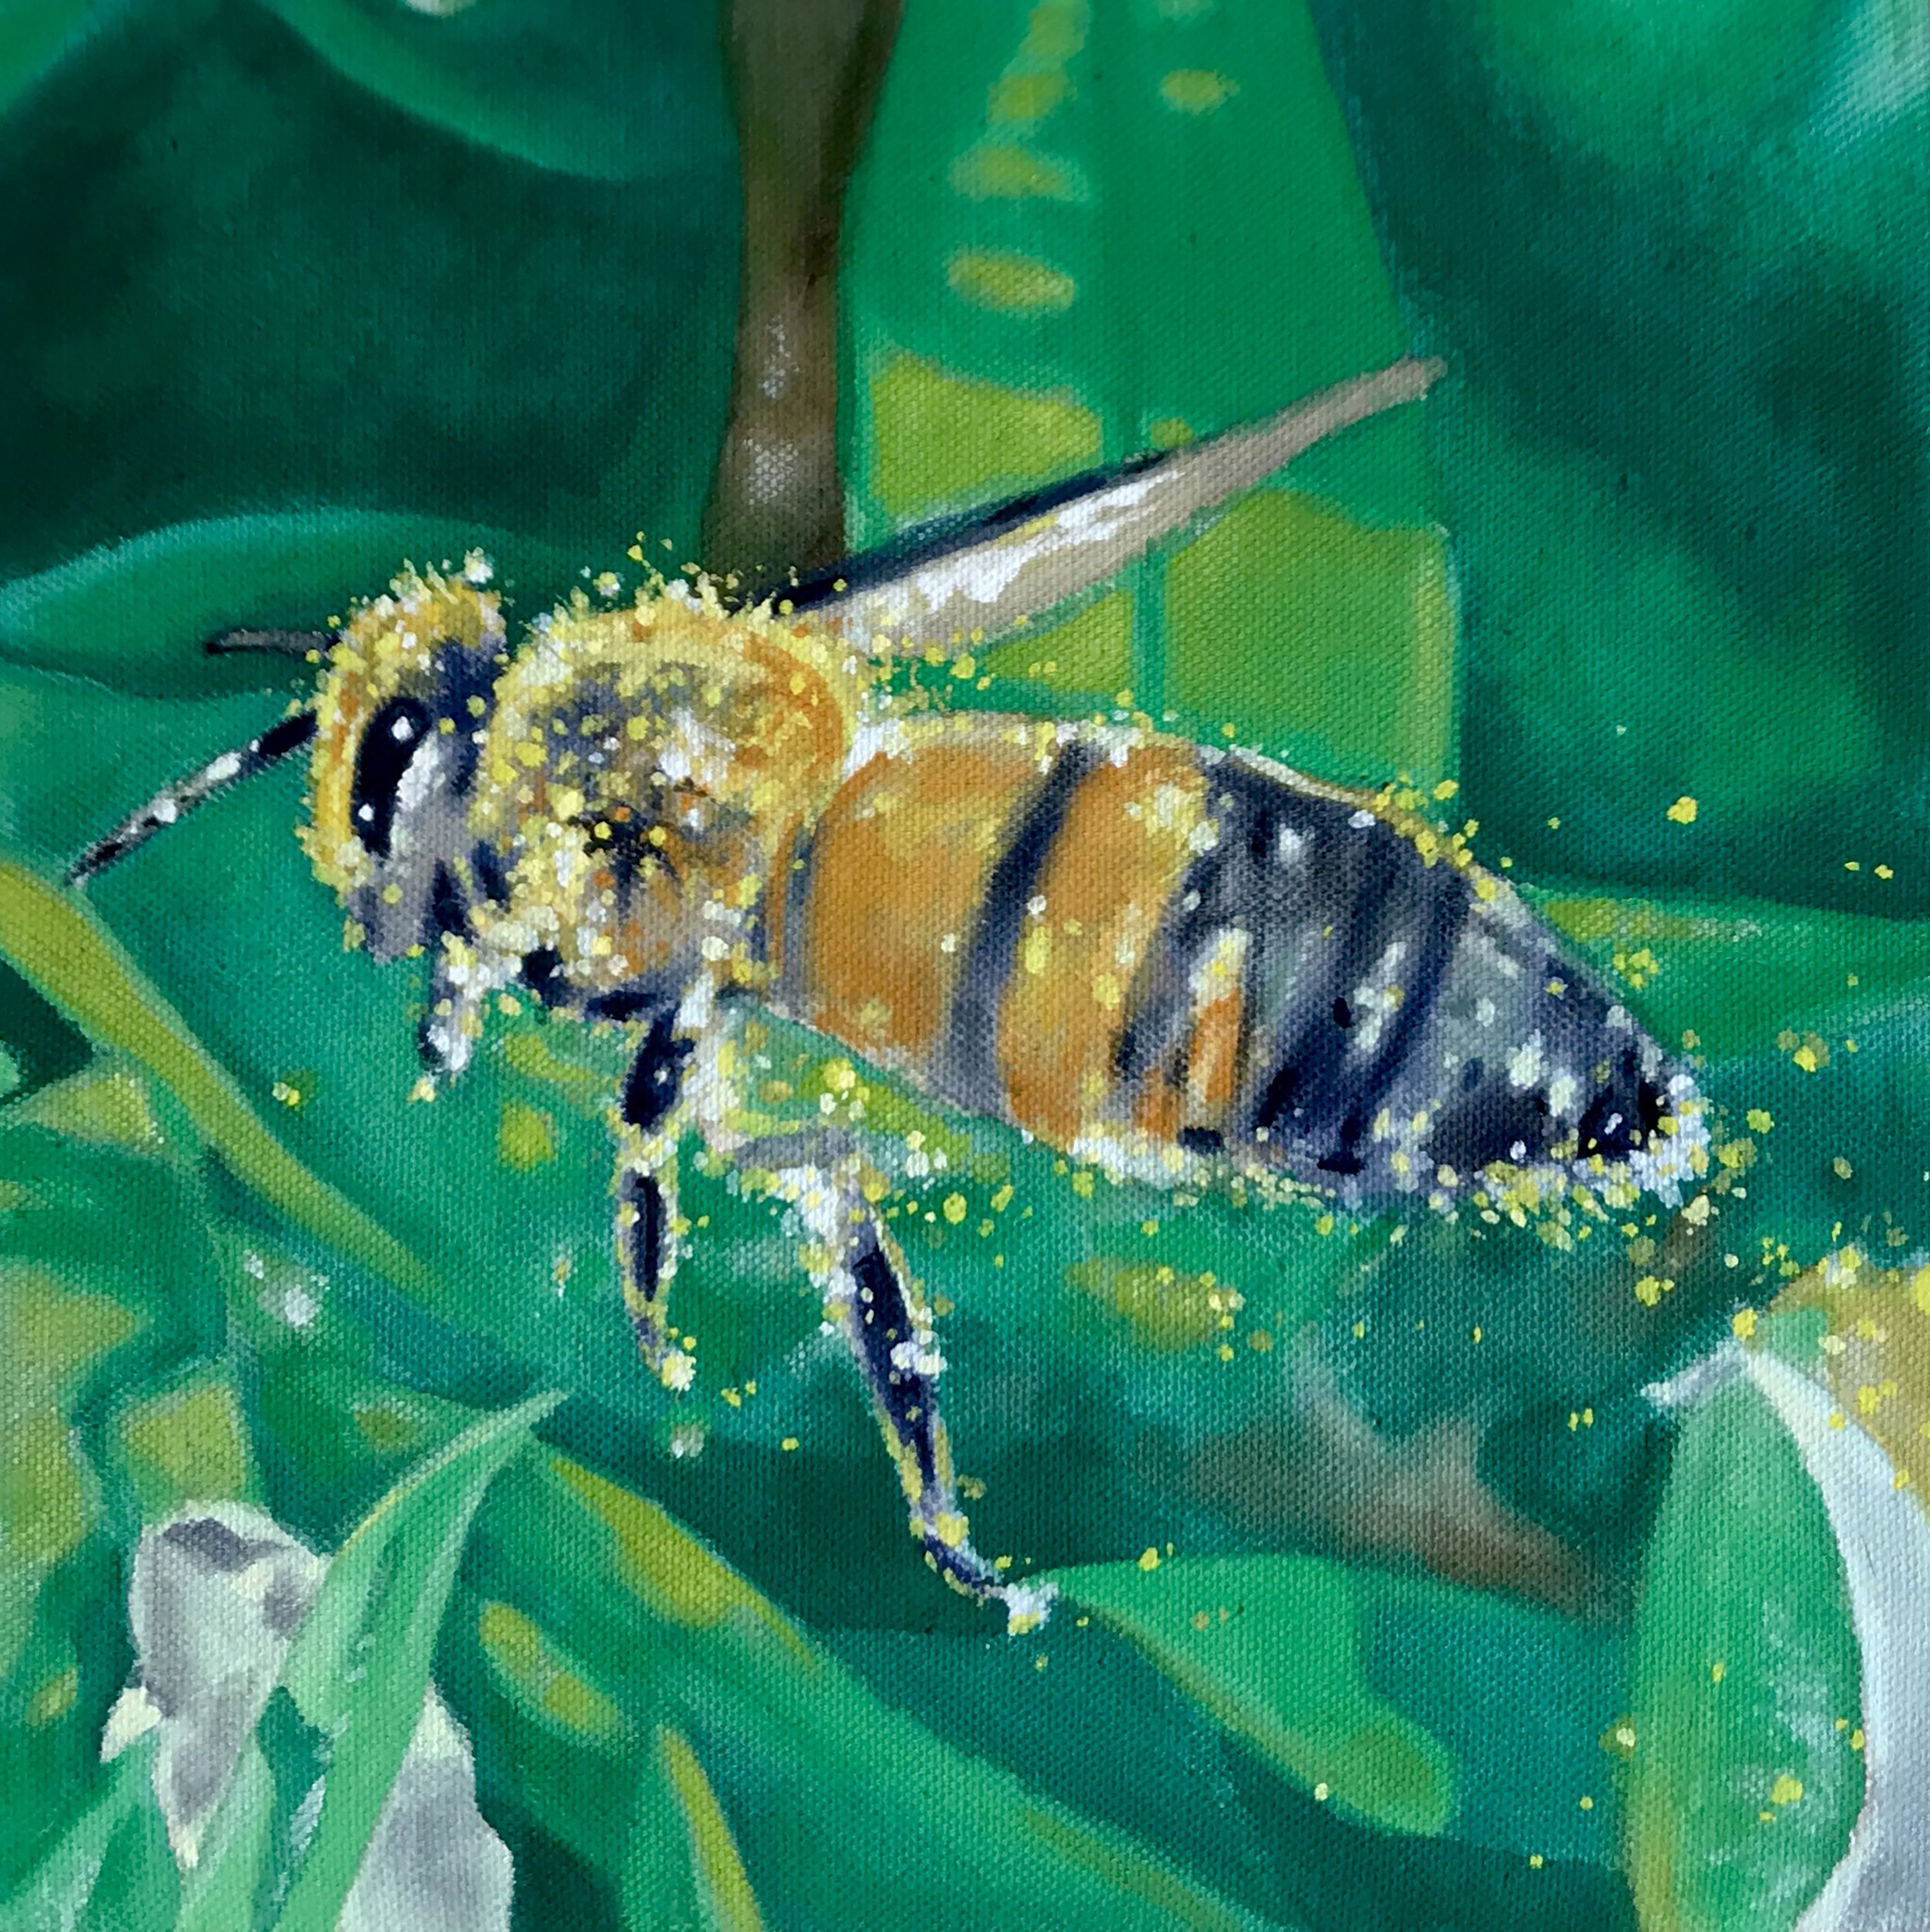   Bee With Pollen  acrylic on raw canvas. 2018  exhibited - Memory Trees, Lake Worth 2023;  Bailey Contemporary Arts during Anything And Everything From The Past 2022; Daggerwing Nature Center, Boca Raton, FL 2018  